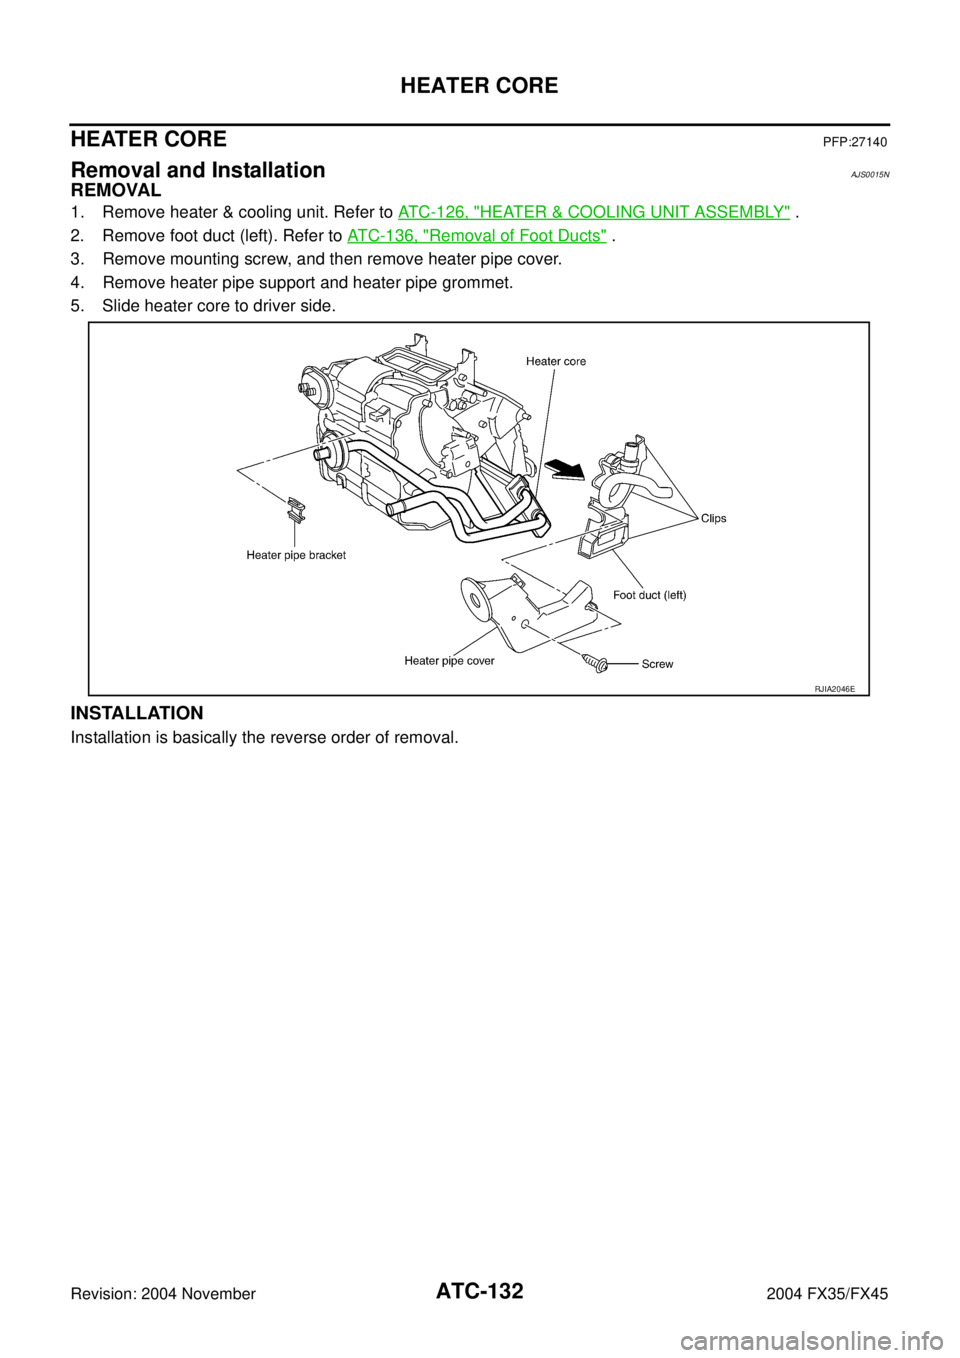 INFINITI FX35 2004  Service Manual ATC-132
HEATER CORE
Revision: 2004 November 2004 FX35/FX45
HEATER COREPFP:27140
Removal and InstallationAJS0015N
REMOVAL
1. Remove heater & cooling unit. Refer to ATC-126, "HEATER & COOLING UNIT ASSEM